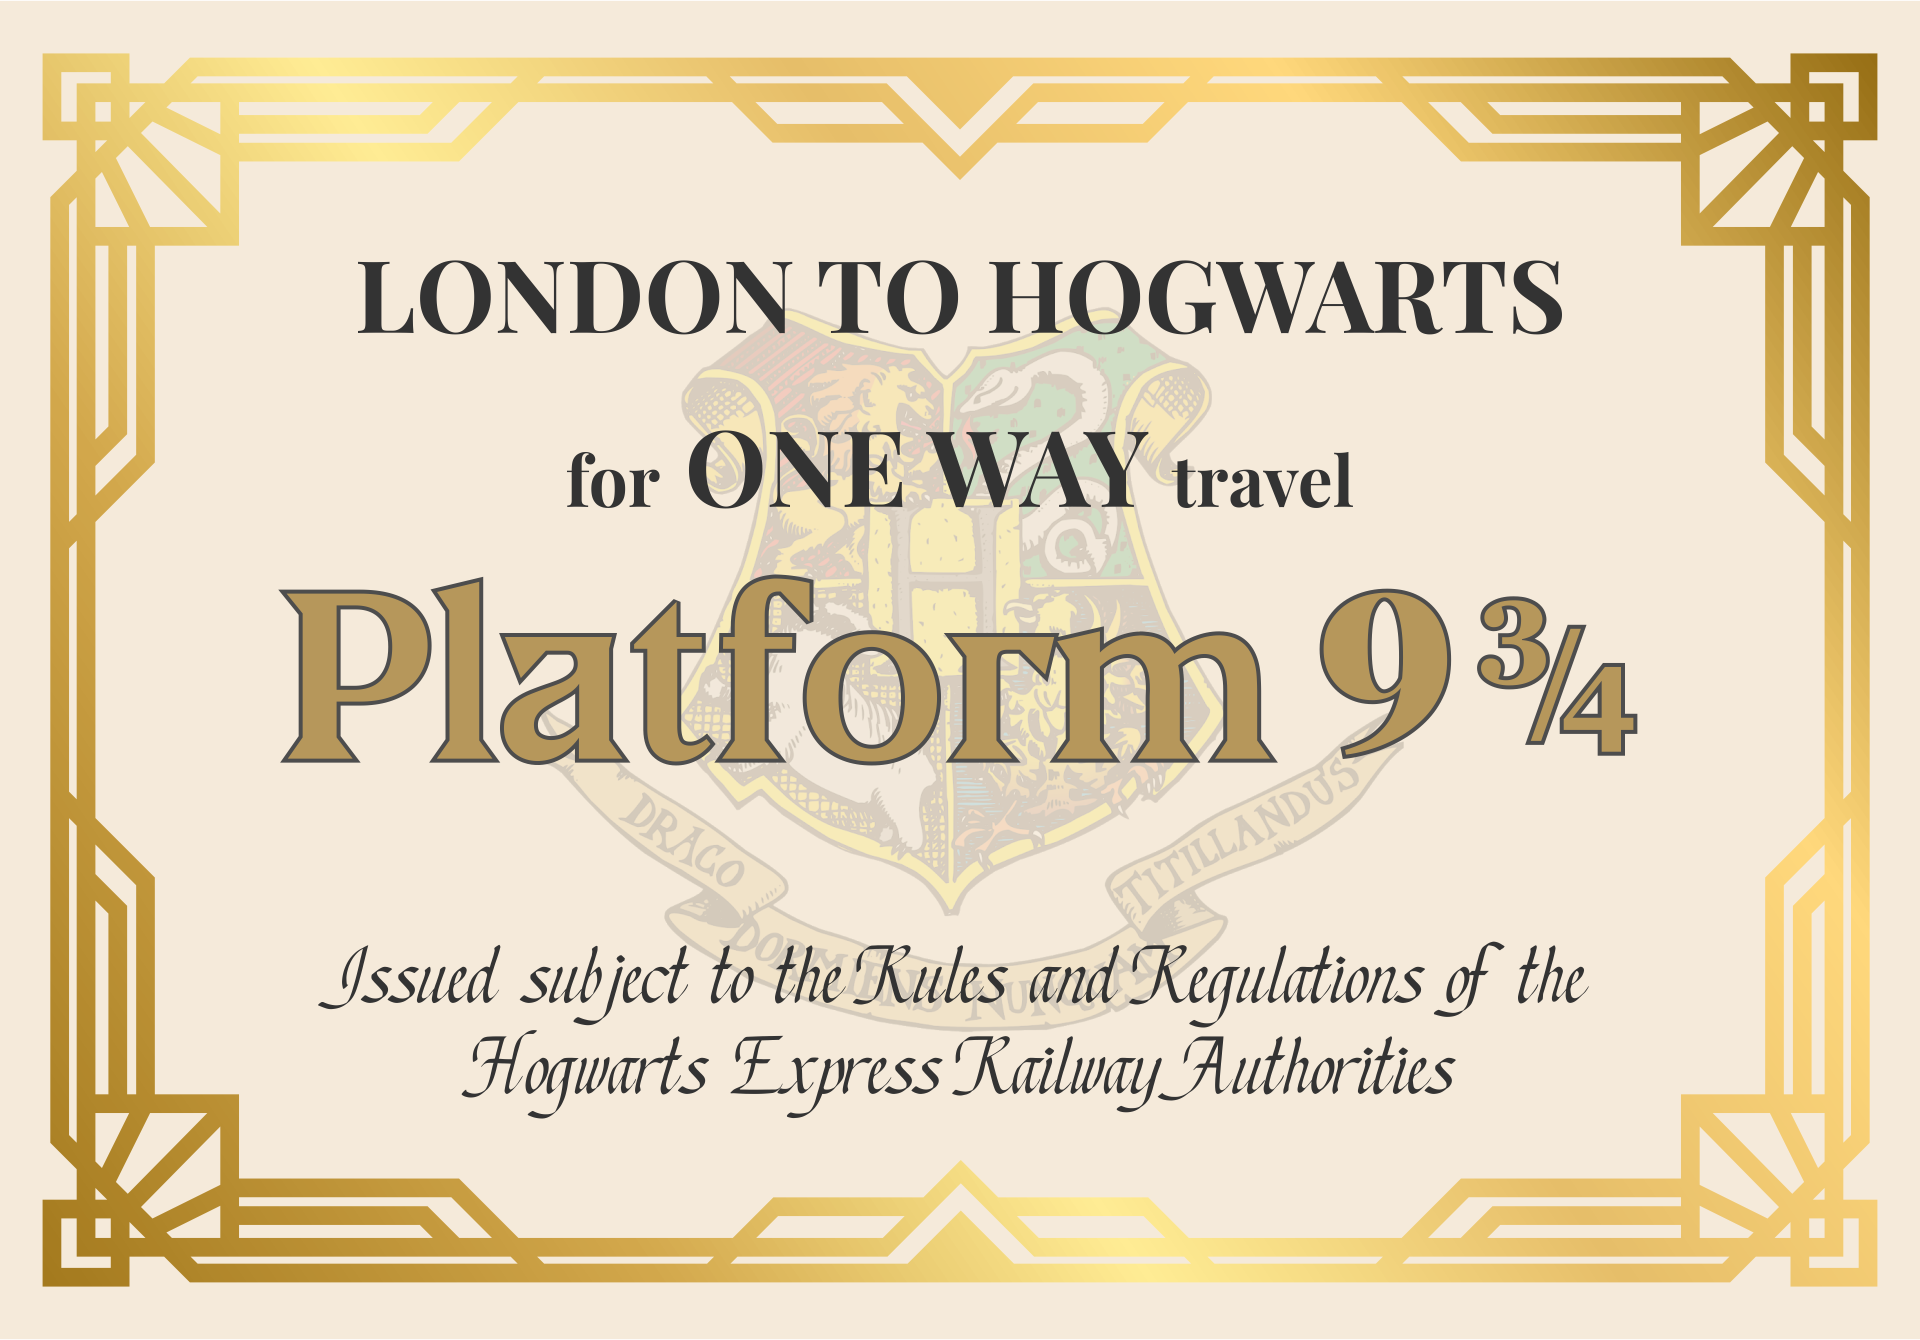 7 Best Images of Printable Train Ticket Harry Potter Harry Potter